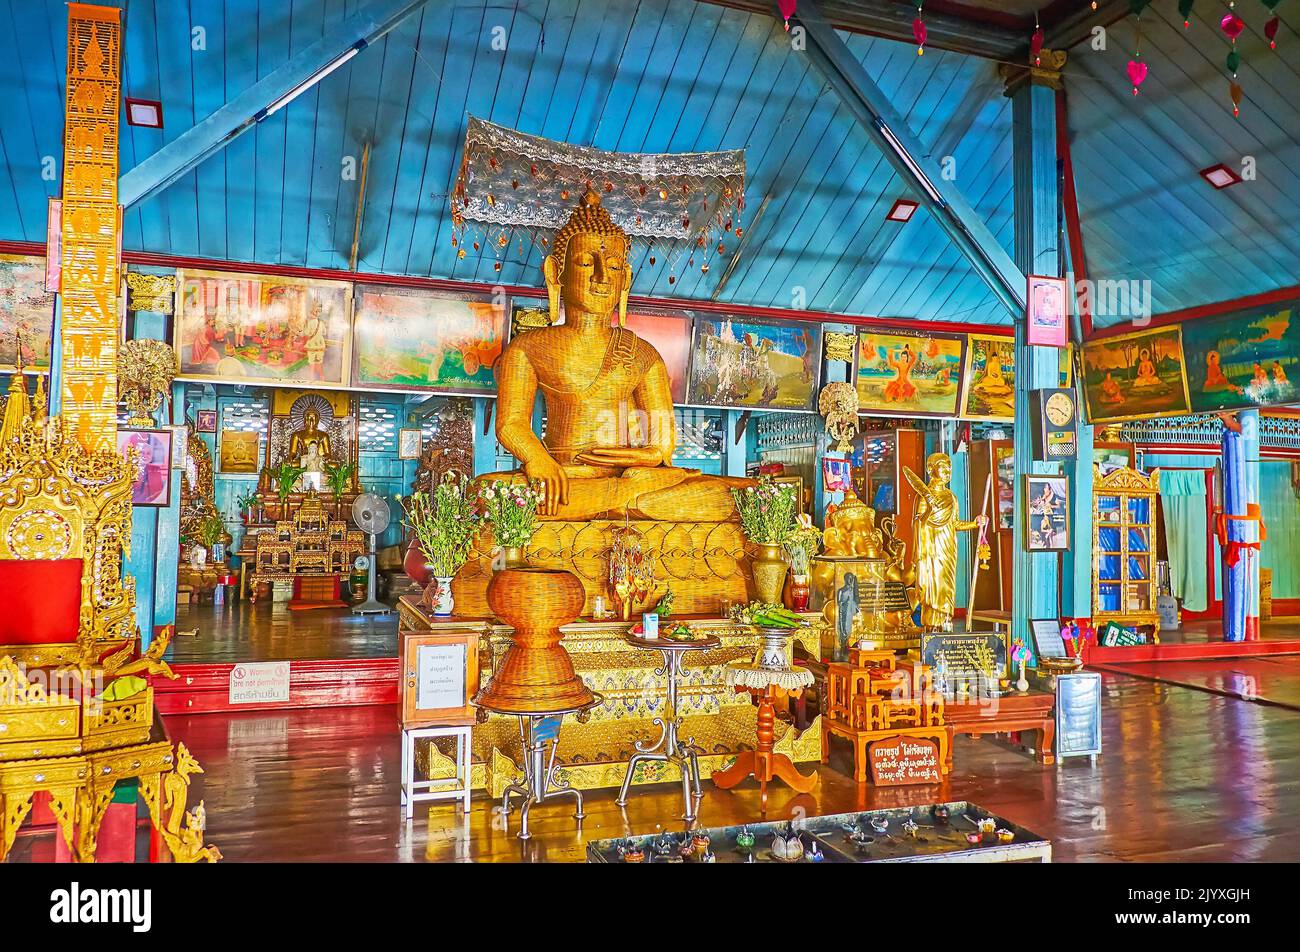 MAE HONG SON, THAILAND - MAY 6, 2019: The altar of the Main Viharn of Wat Chong Klang Temple with wicker image of Buddha in Earth Touching gesture, on Stock Photo